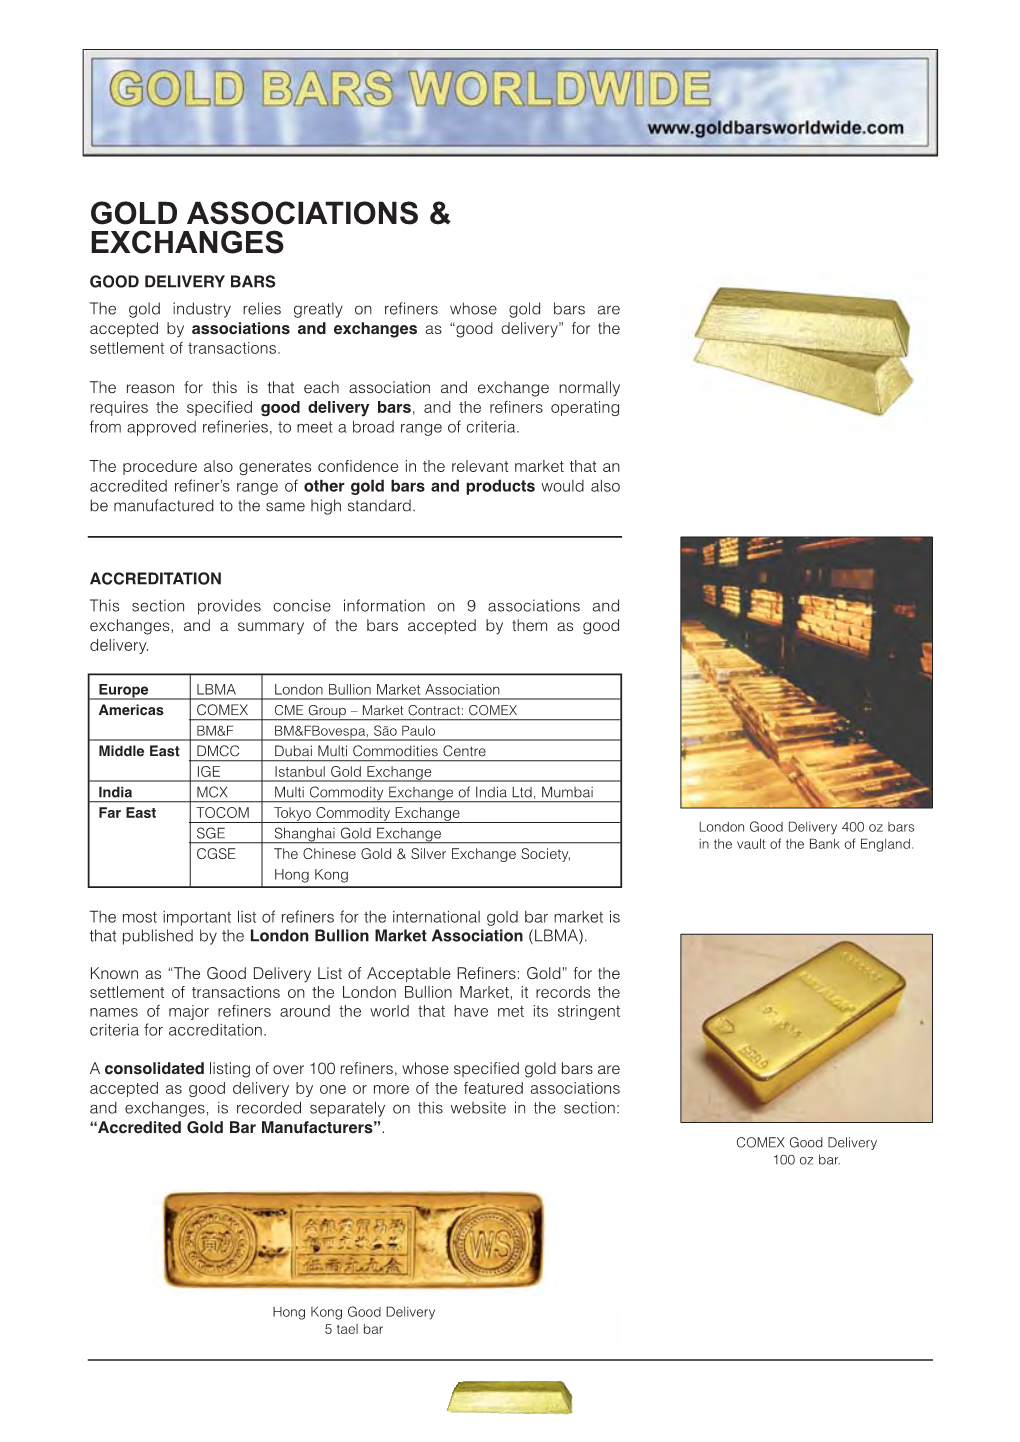 Gold Associations & Exchanges